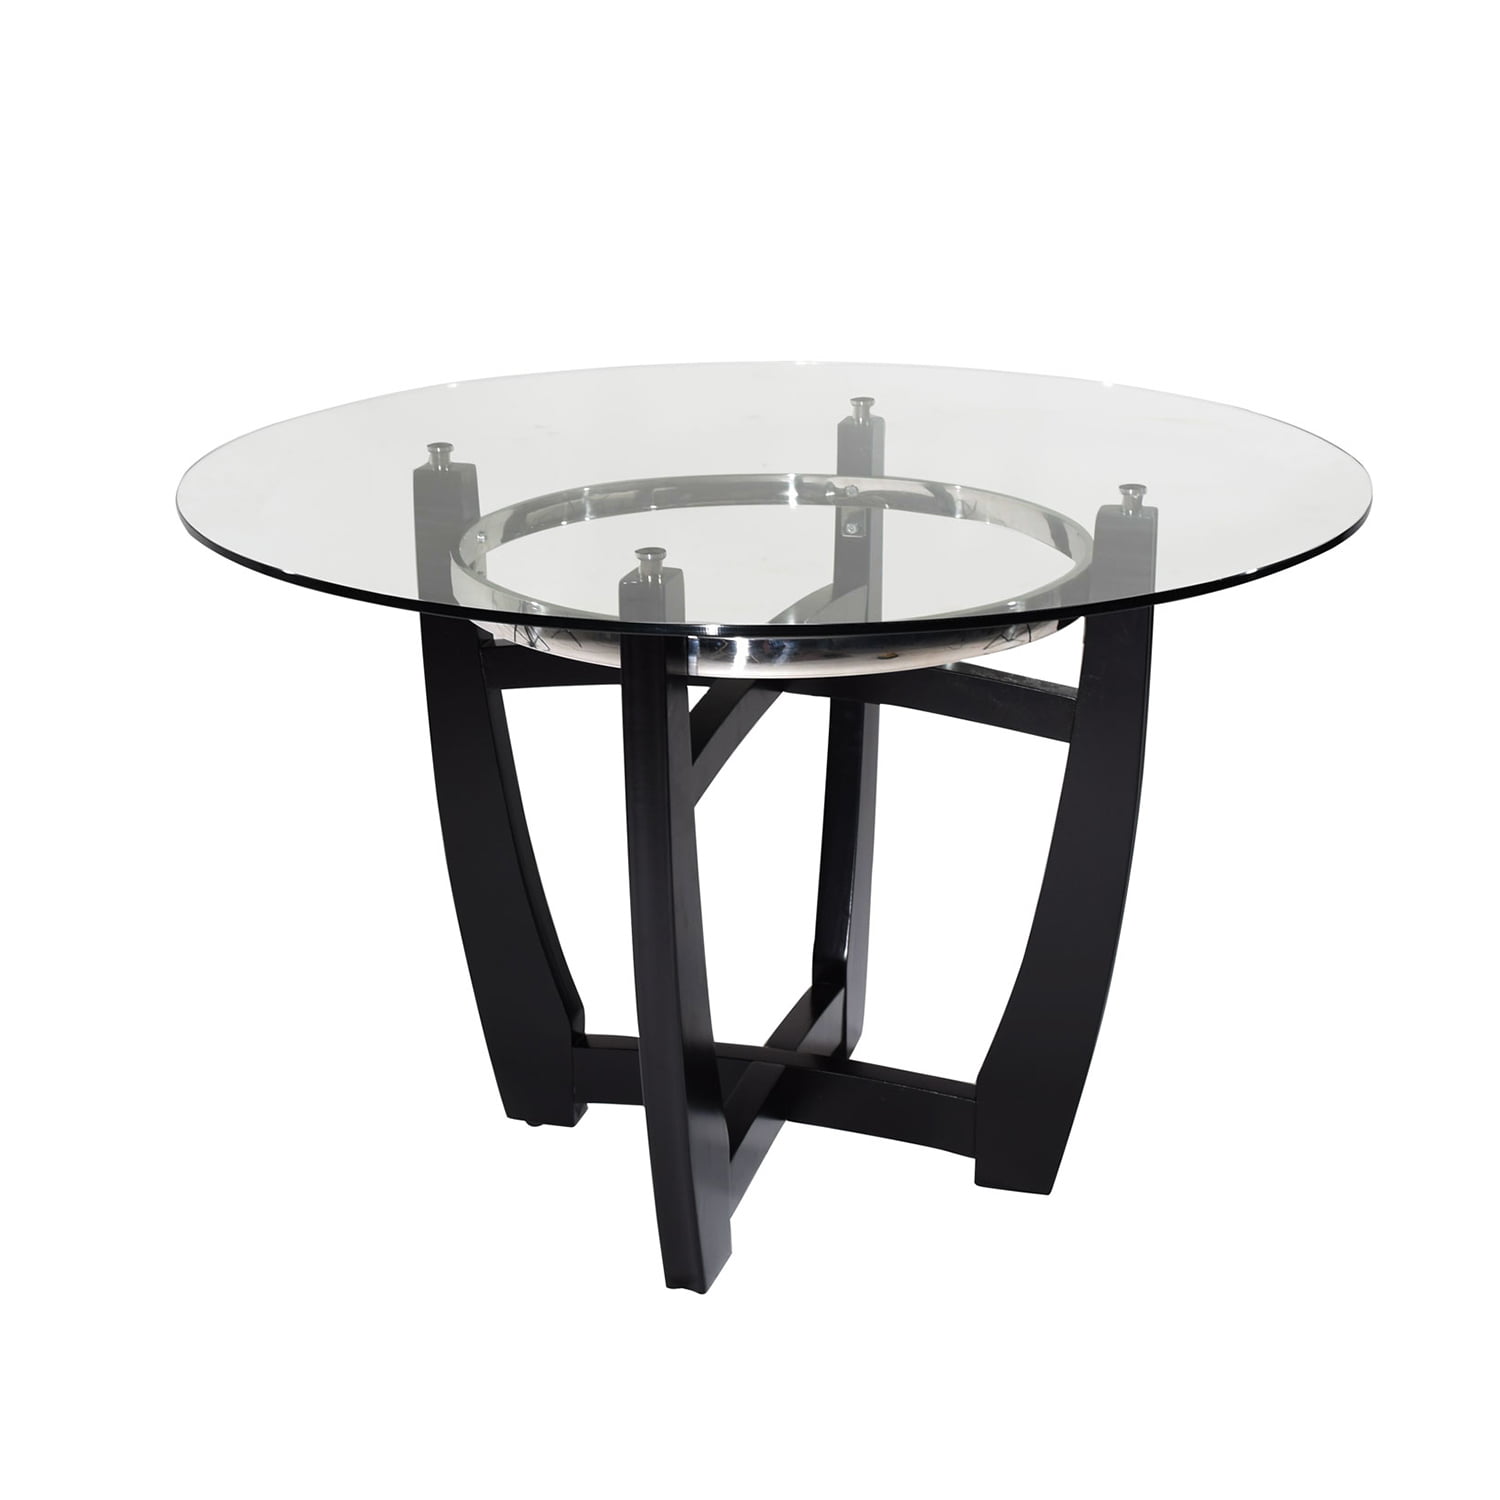 Round Glass Kitchen Table Furniture, Modern Round Dining Table Glass Top Wood Based